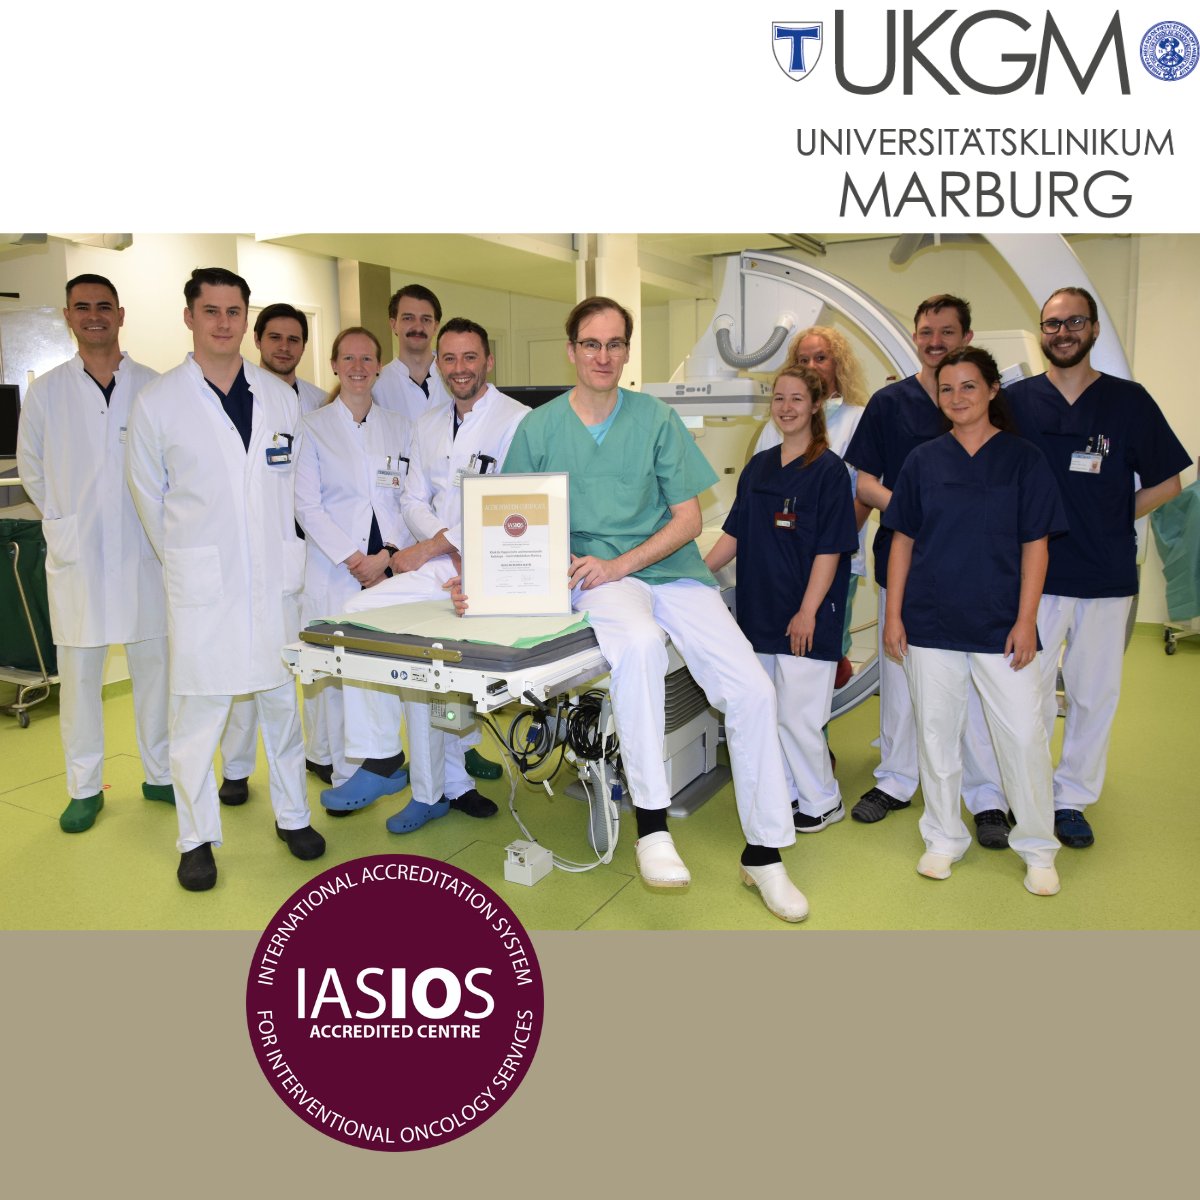 🙌 Join us in congratulating @UKGM_Presse on becoming the second IASIOS Accredited Centre in Germany! We Applaud Prof. Dr. Andreas H. Mahnken and the entire team at UKGM for achieving the IASIOS accreditation seal. #iasios #IO #cancercare